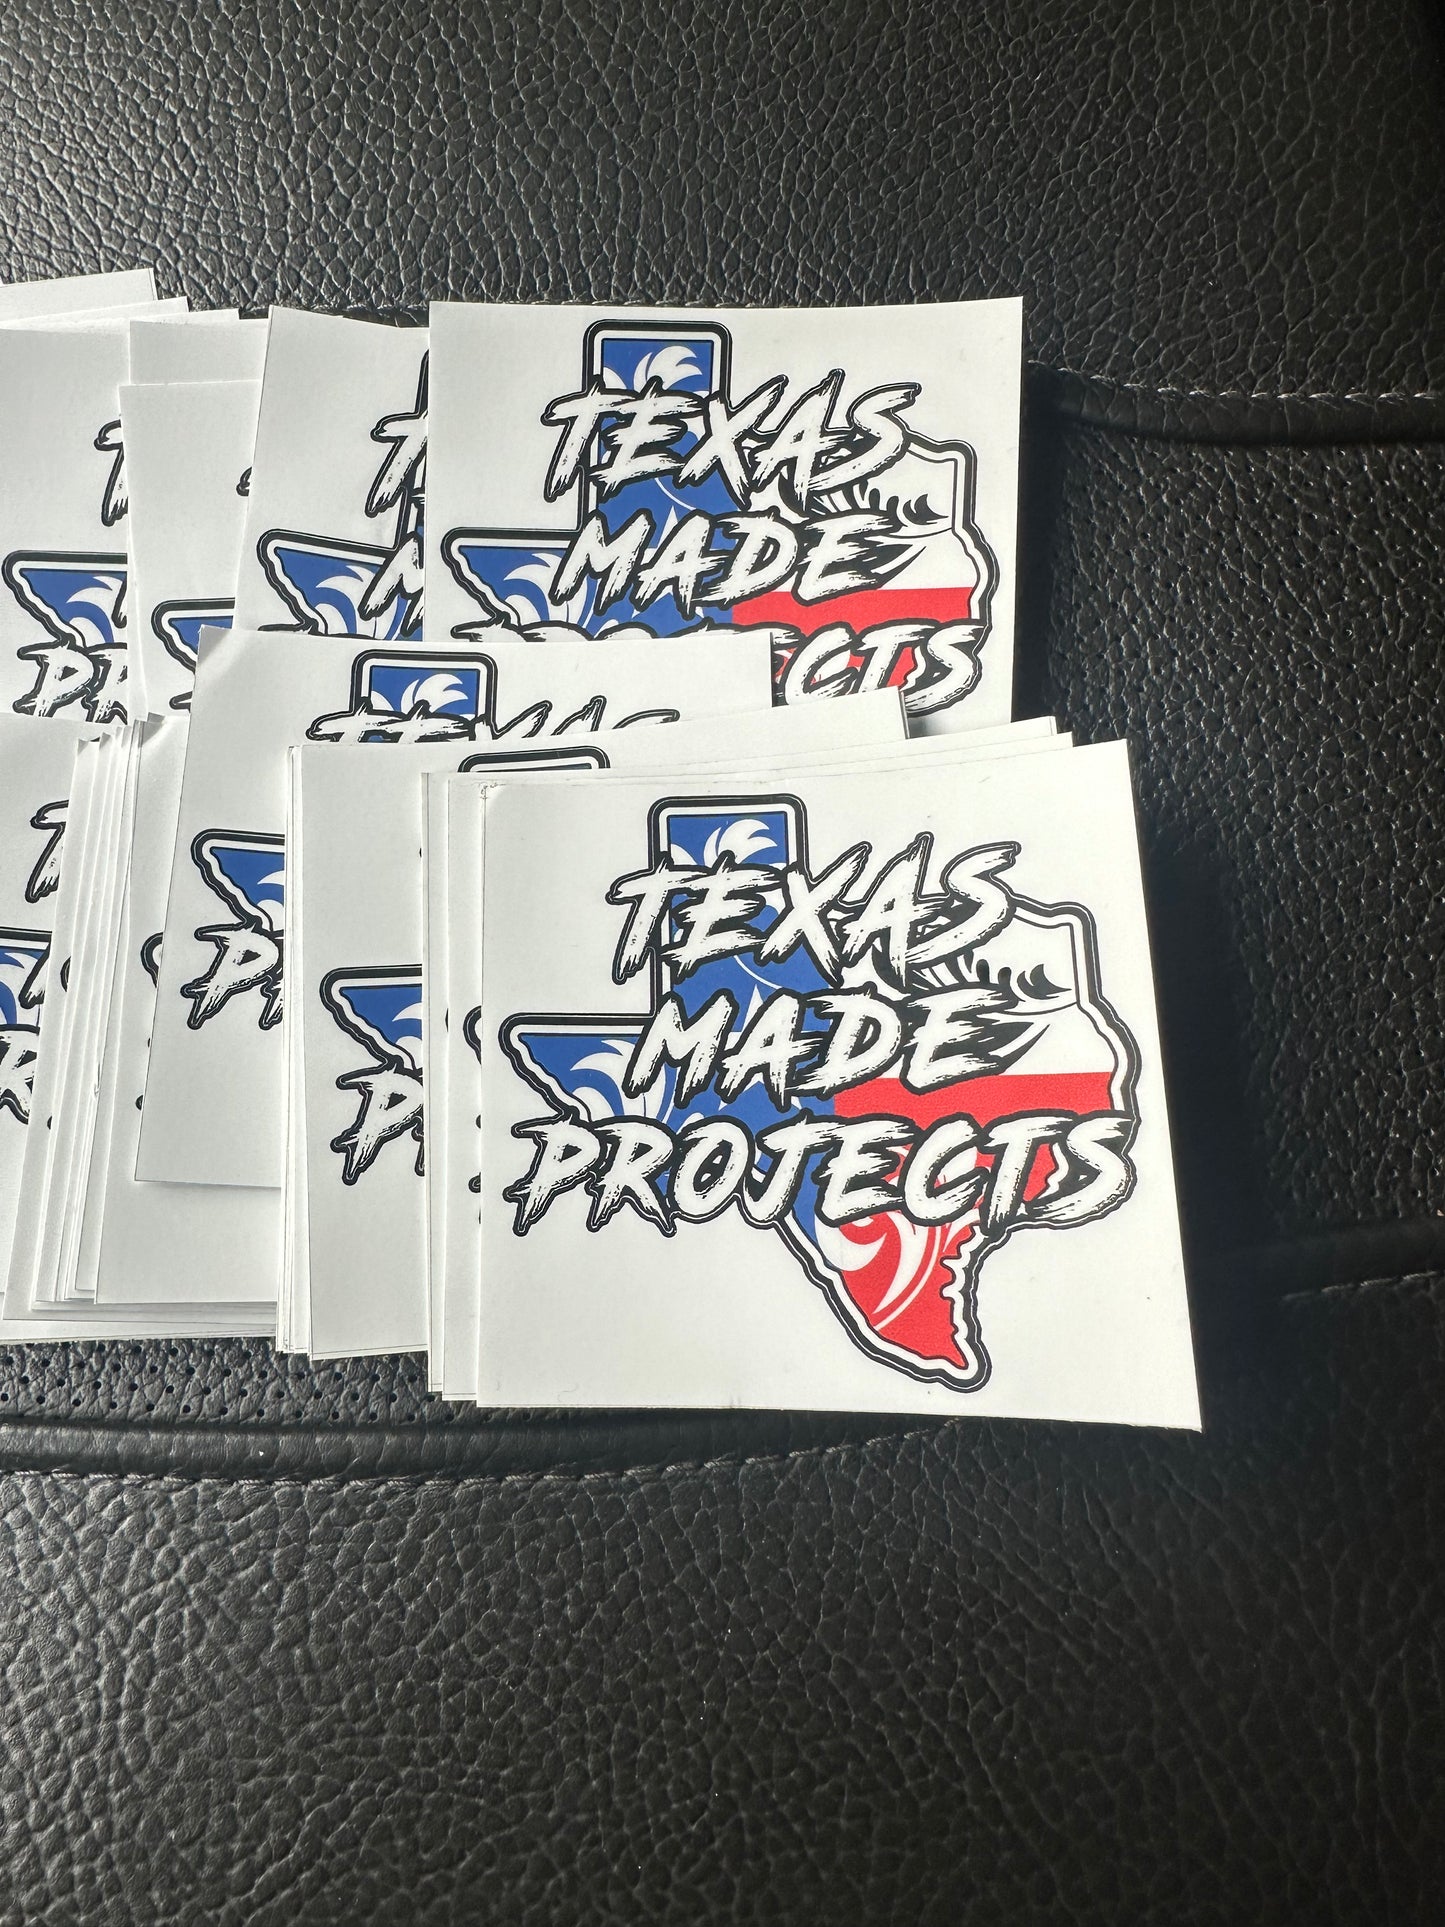 TEXAS MADE PROJECTS 3”x3”